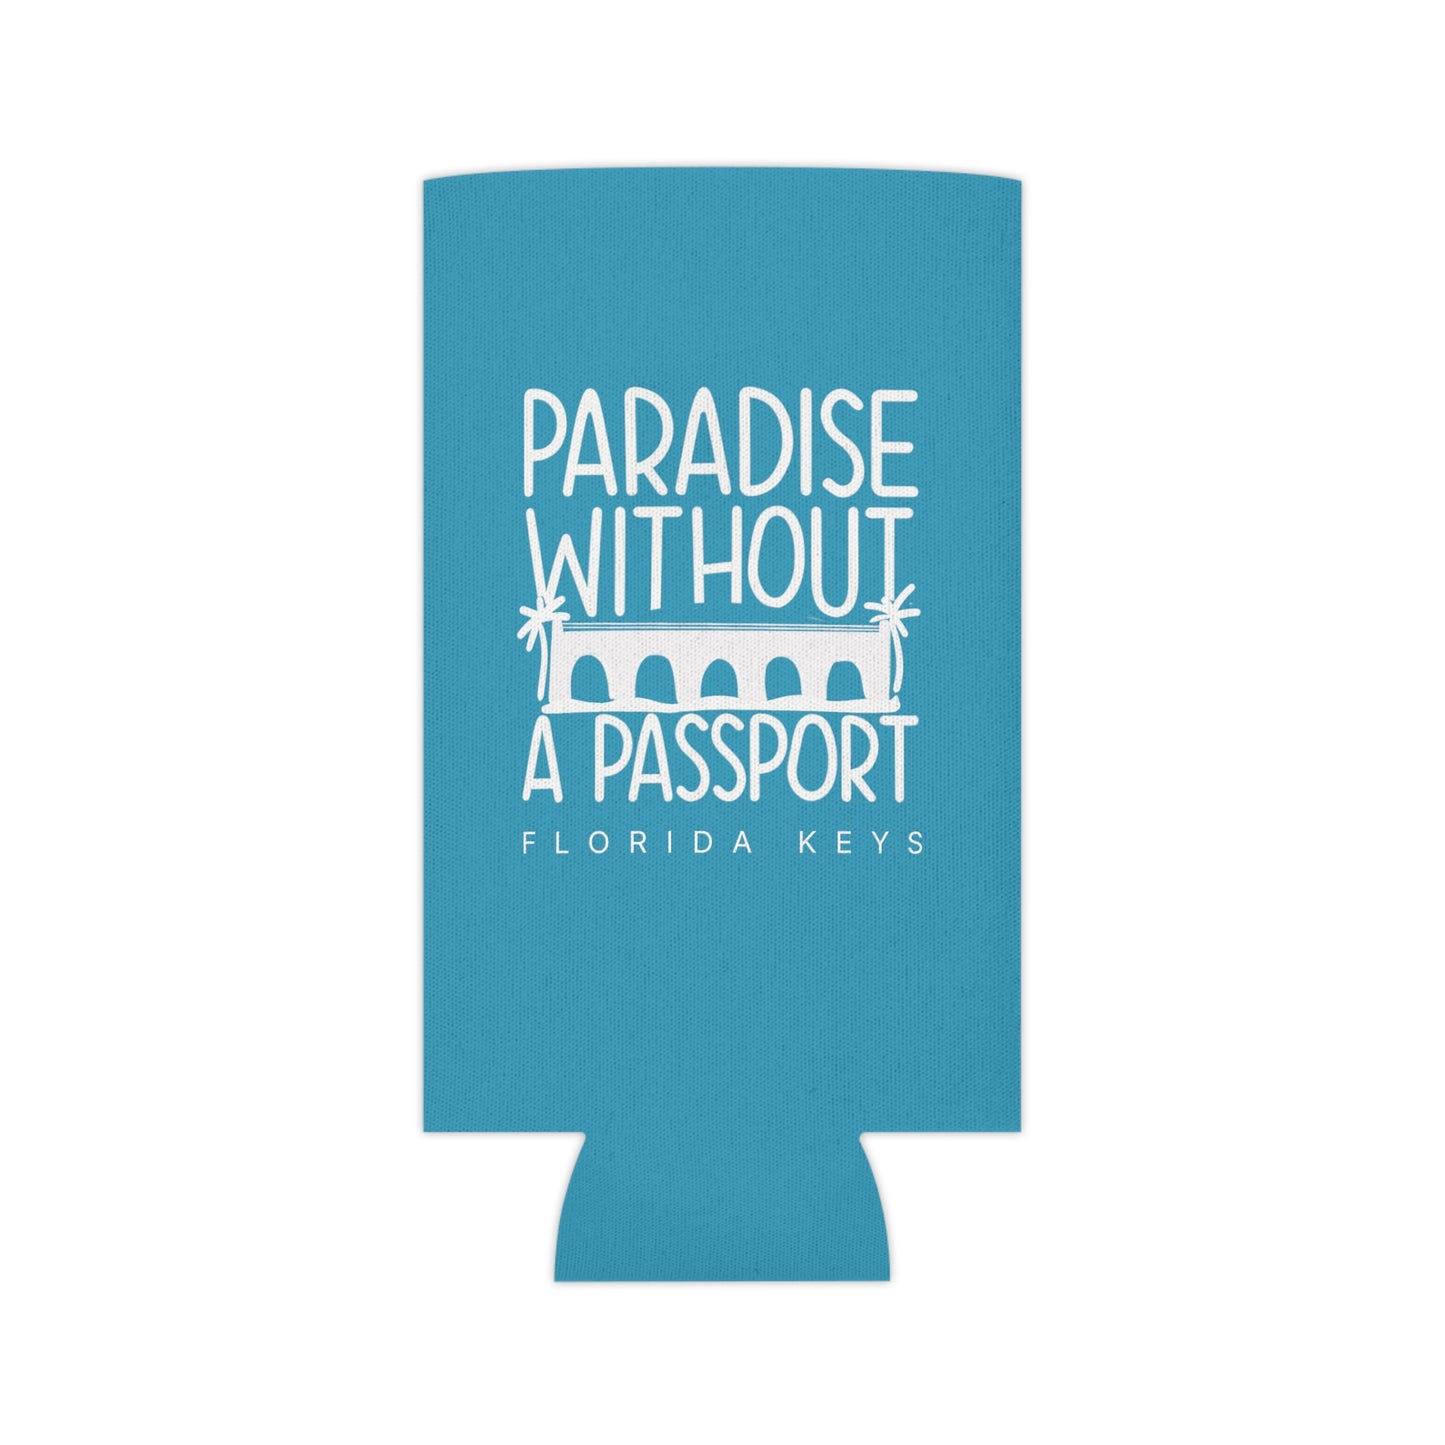 paradise without a passport - skinny can coozie & regular can coozie, blue with white